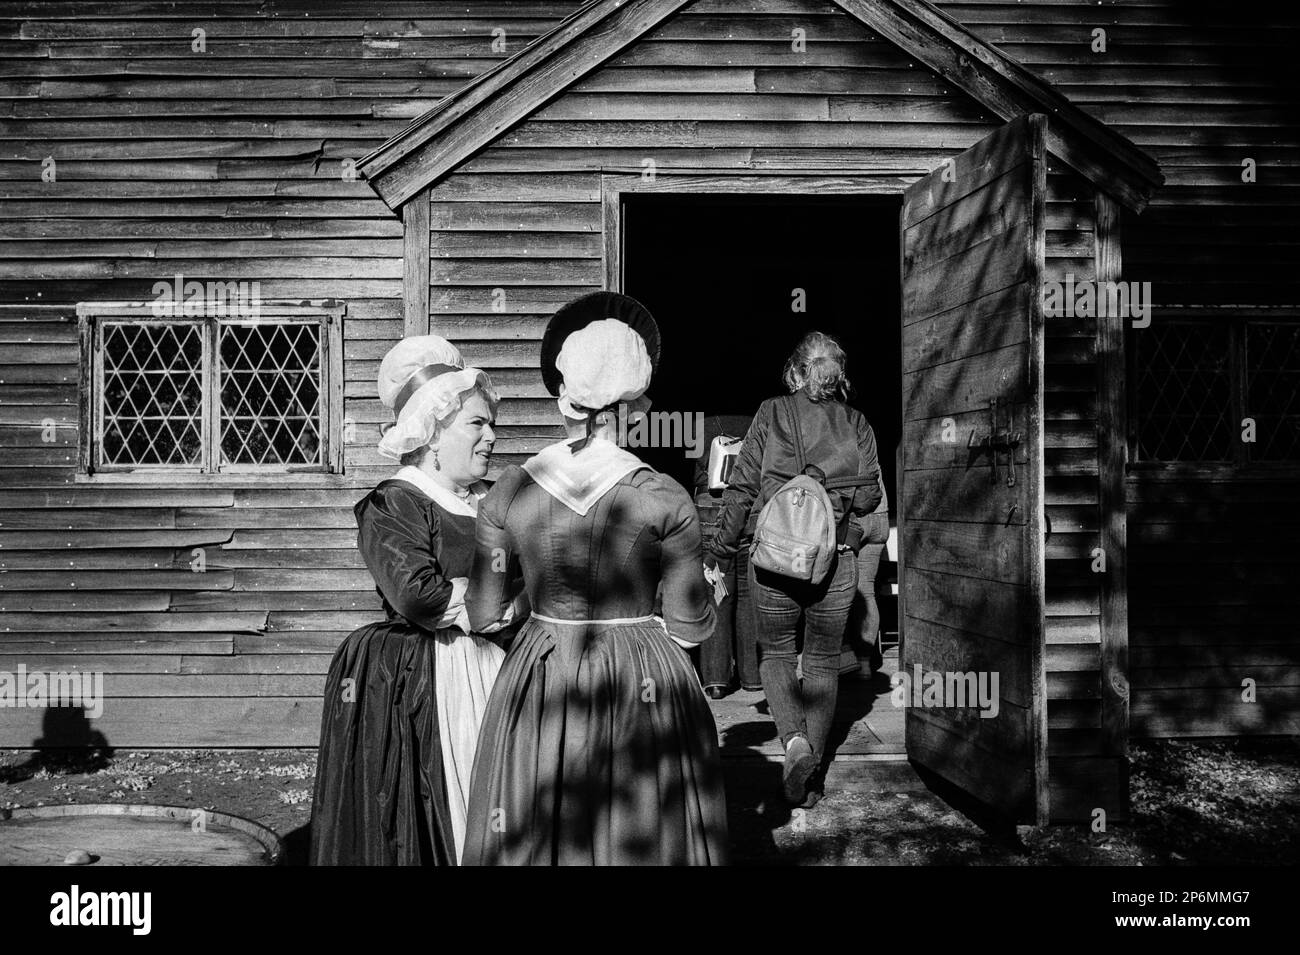 An actress dressed as Martha Washington stands with a counterpart as a tourist enters the meeting house during a Revolutionary War reenactment at the Stock Photo